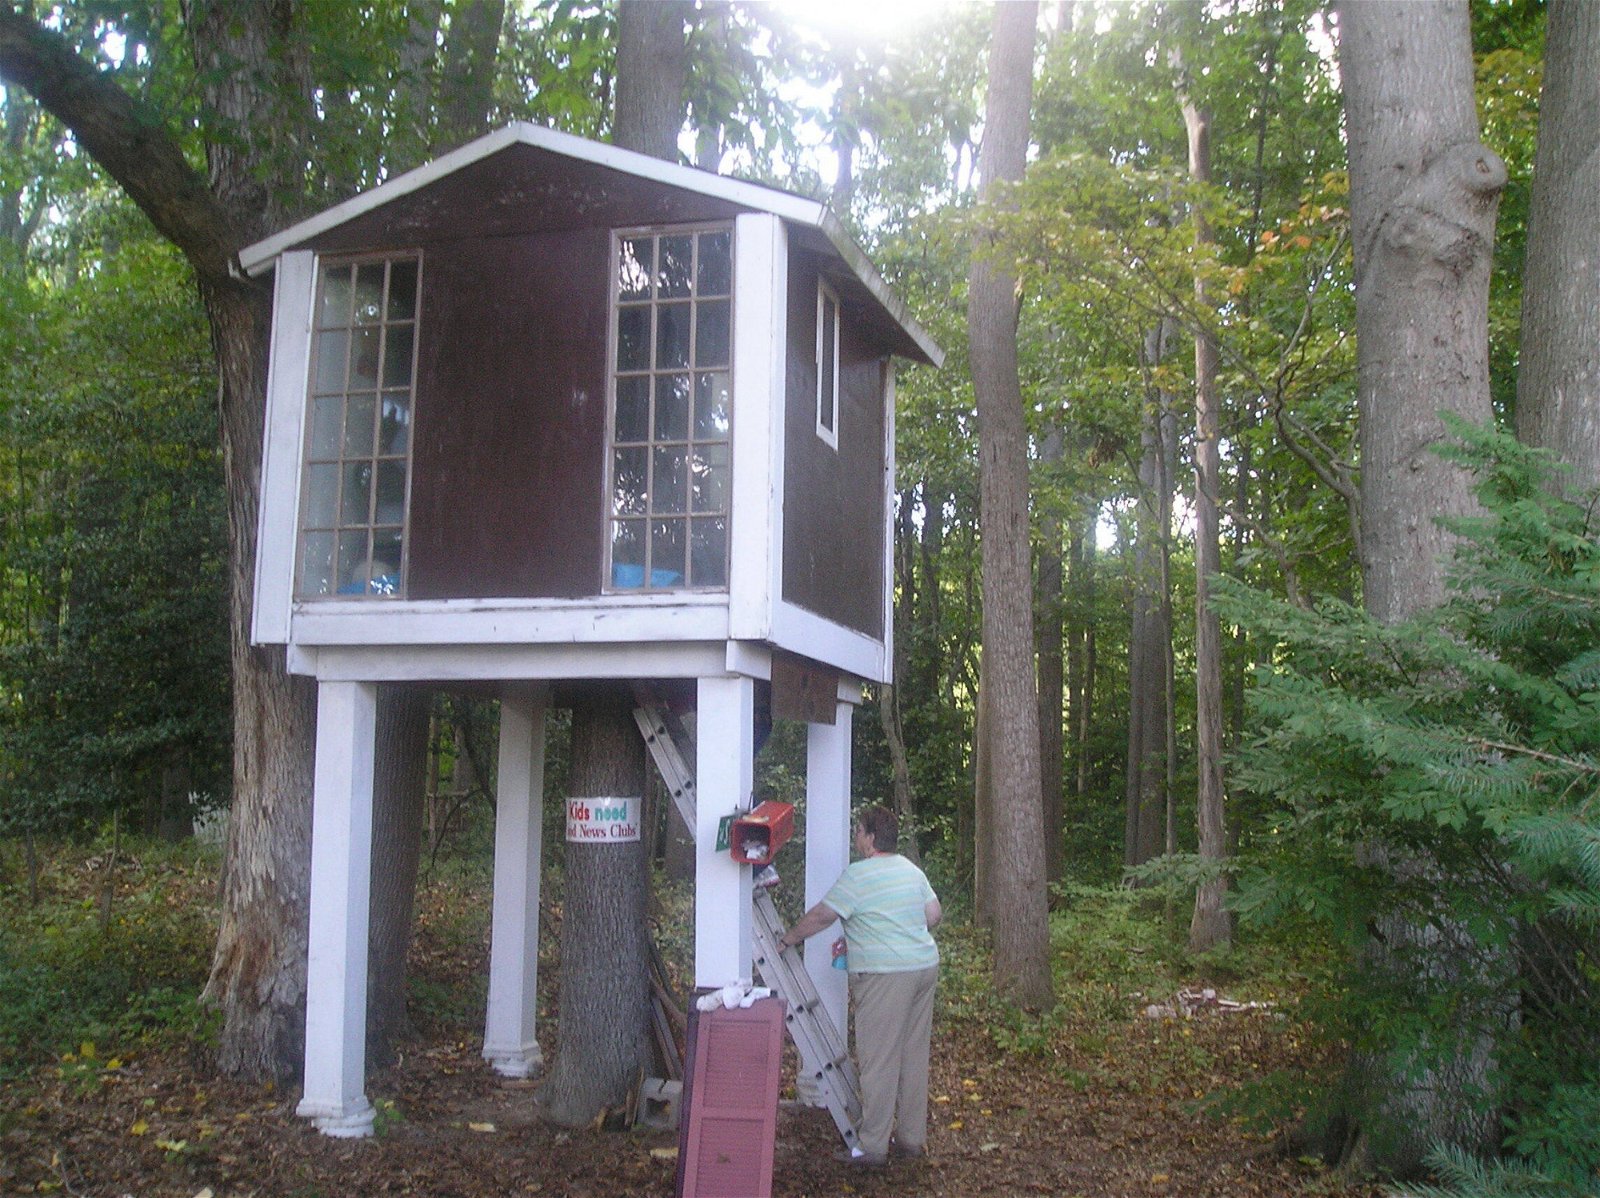 Brown and white treehouse with windows and a mailbox